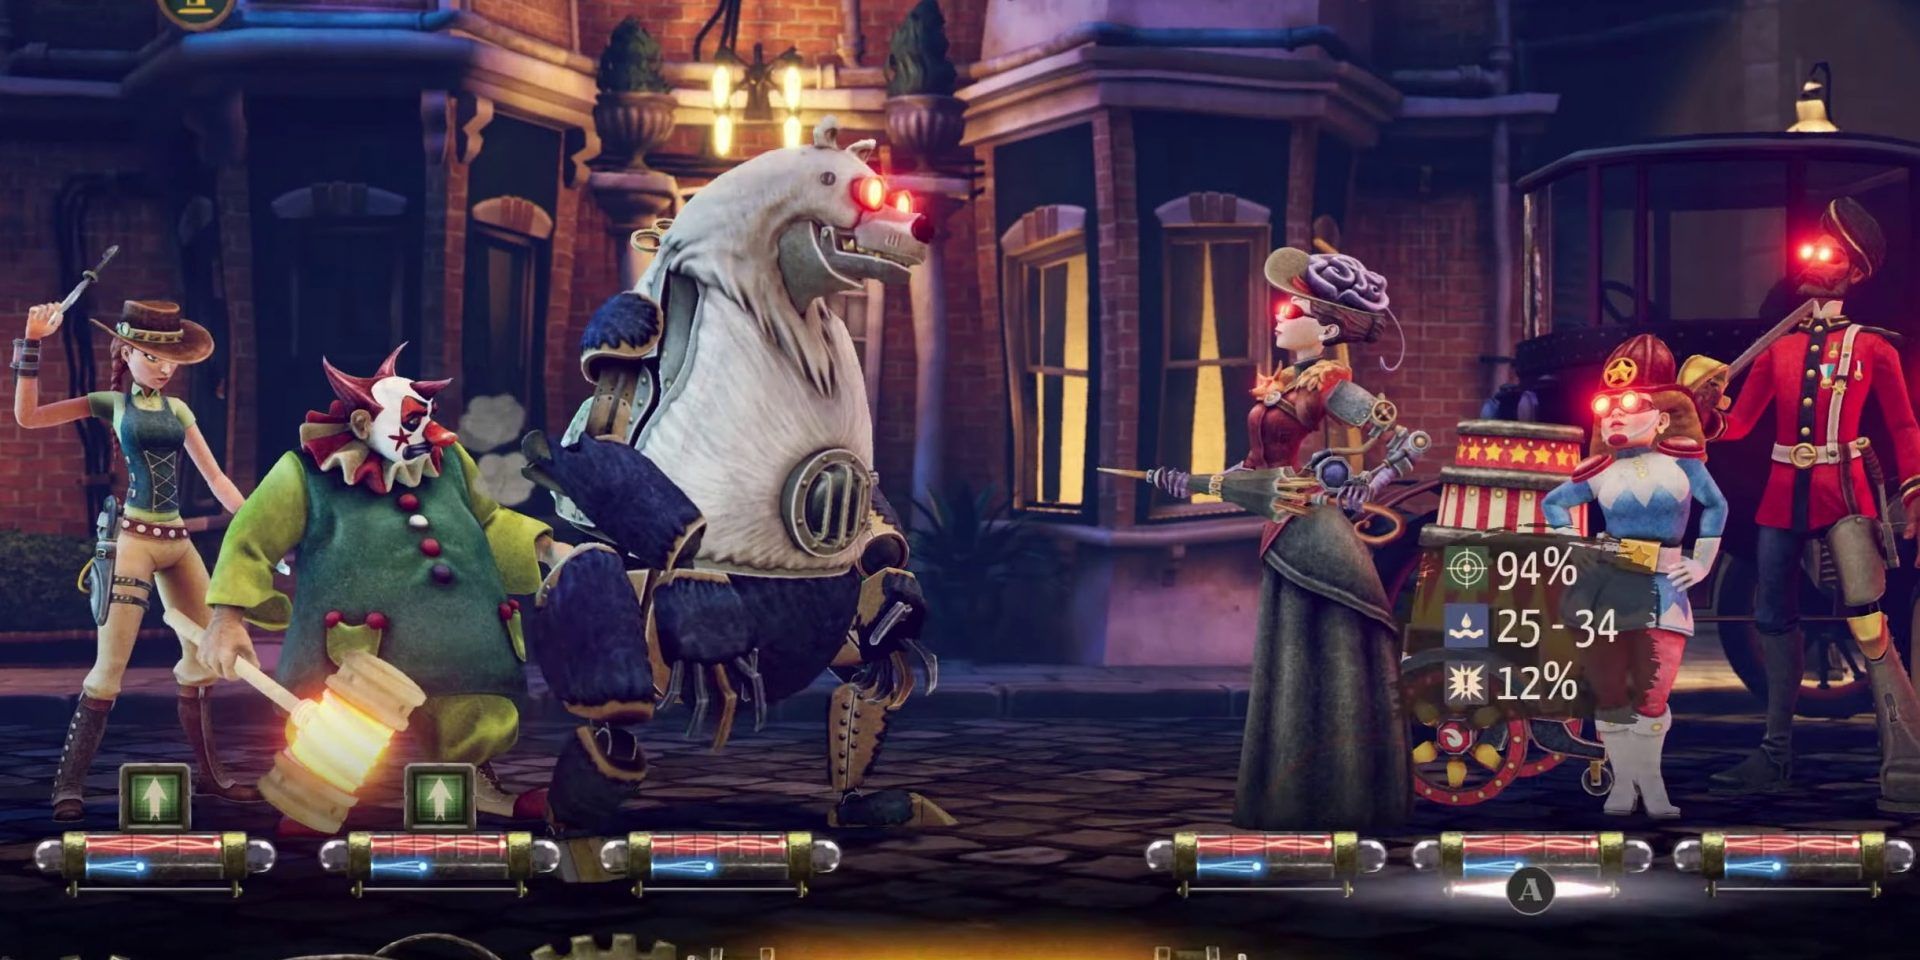 Turn-Based RPG Circus Electrique Launches This Fall